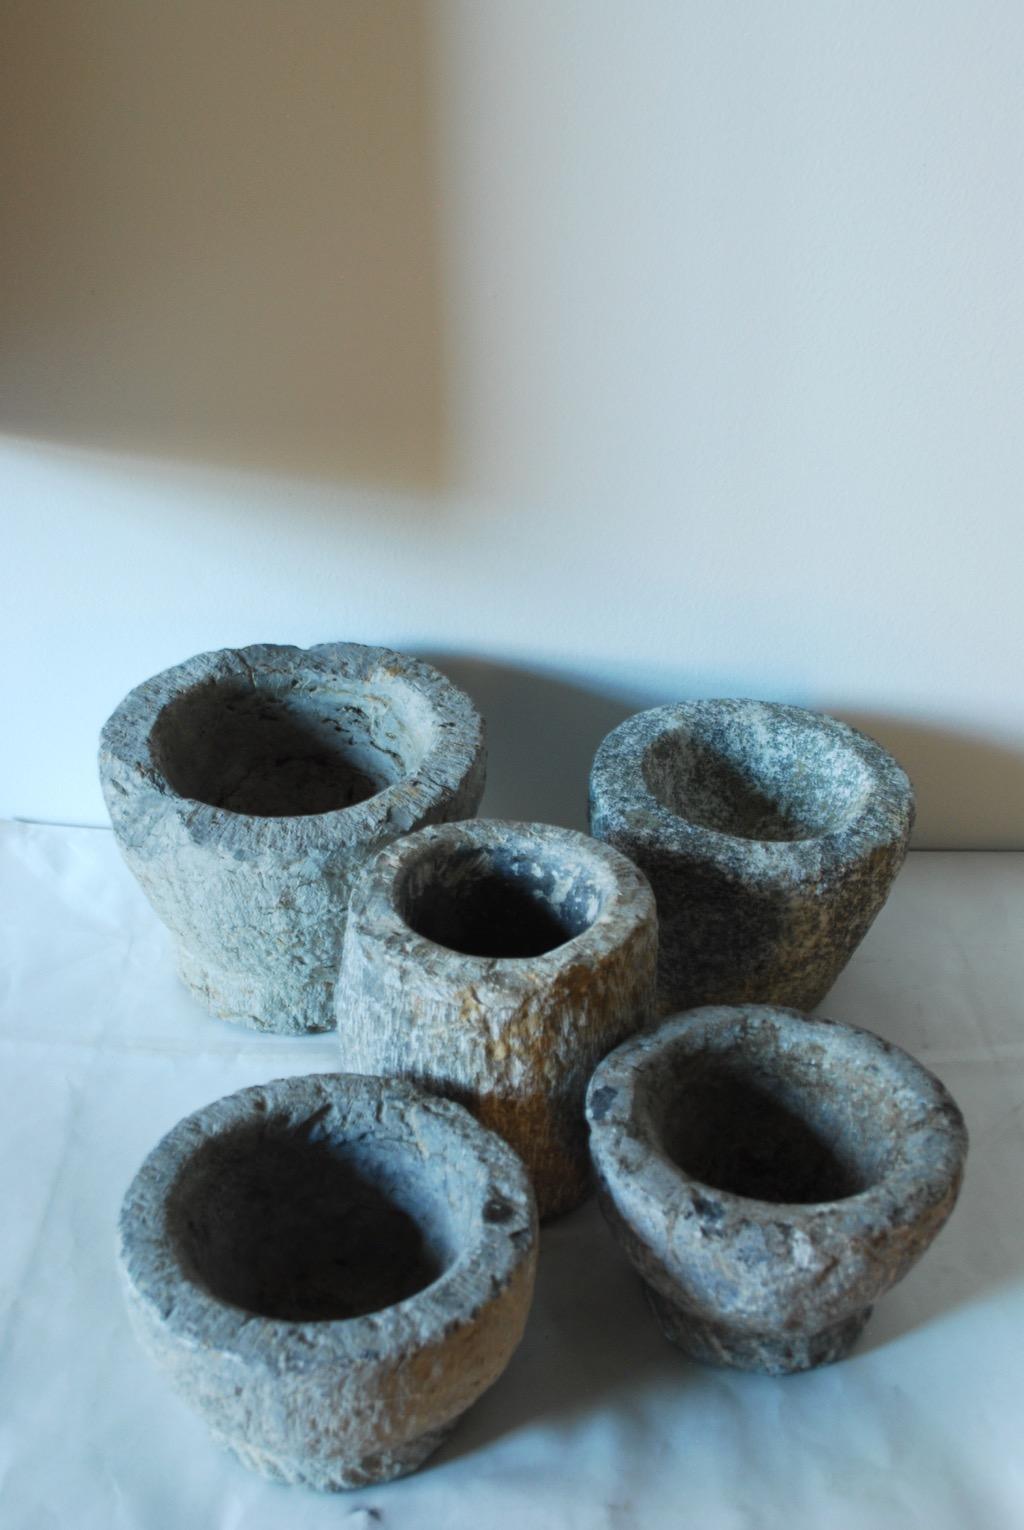 Late 19th Century Chinese Stone Mortars. 

Collection dimensions:
4.5